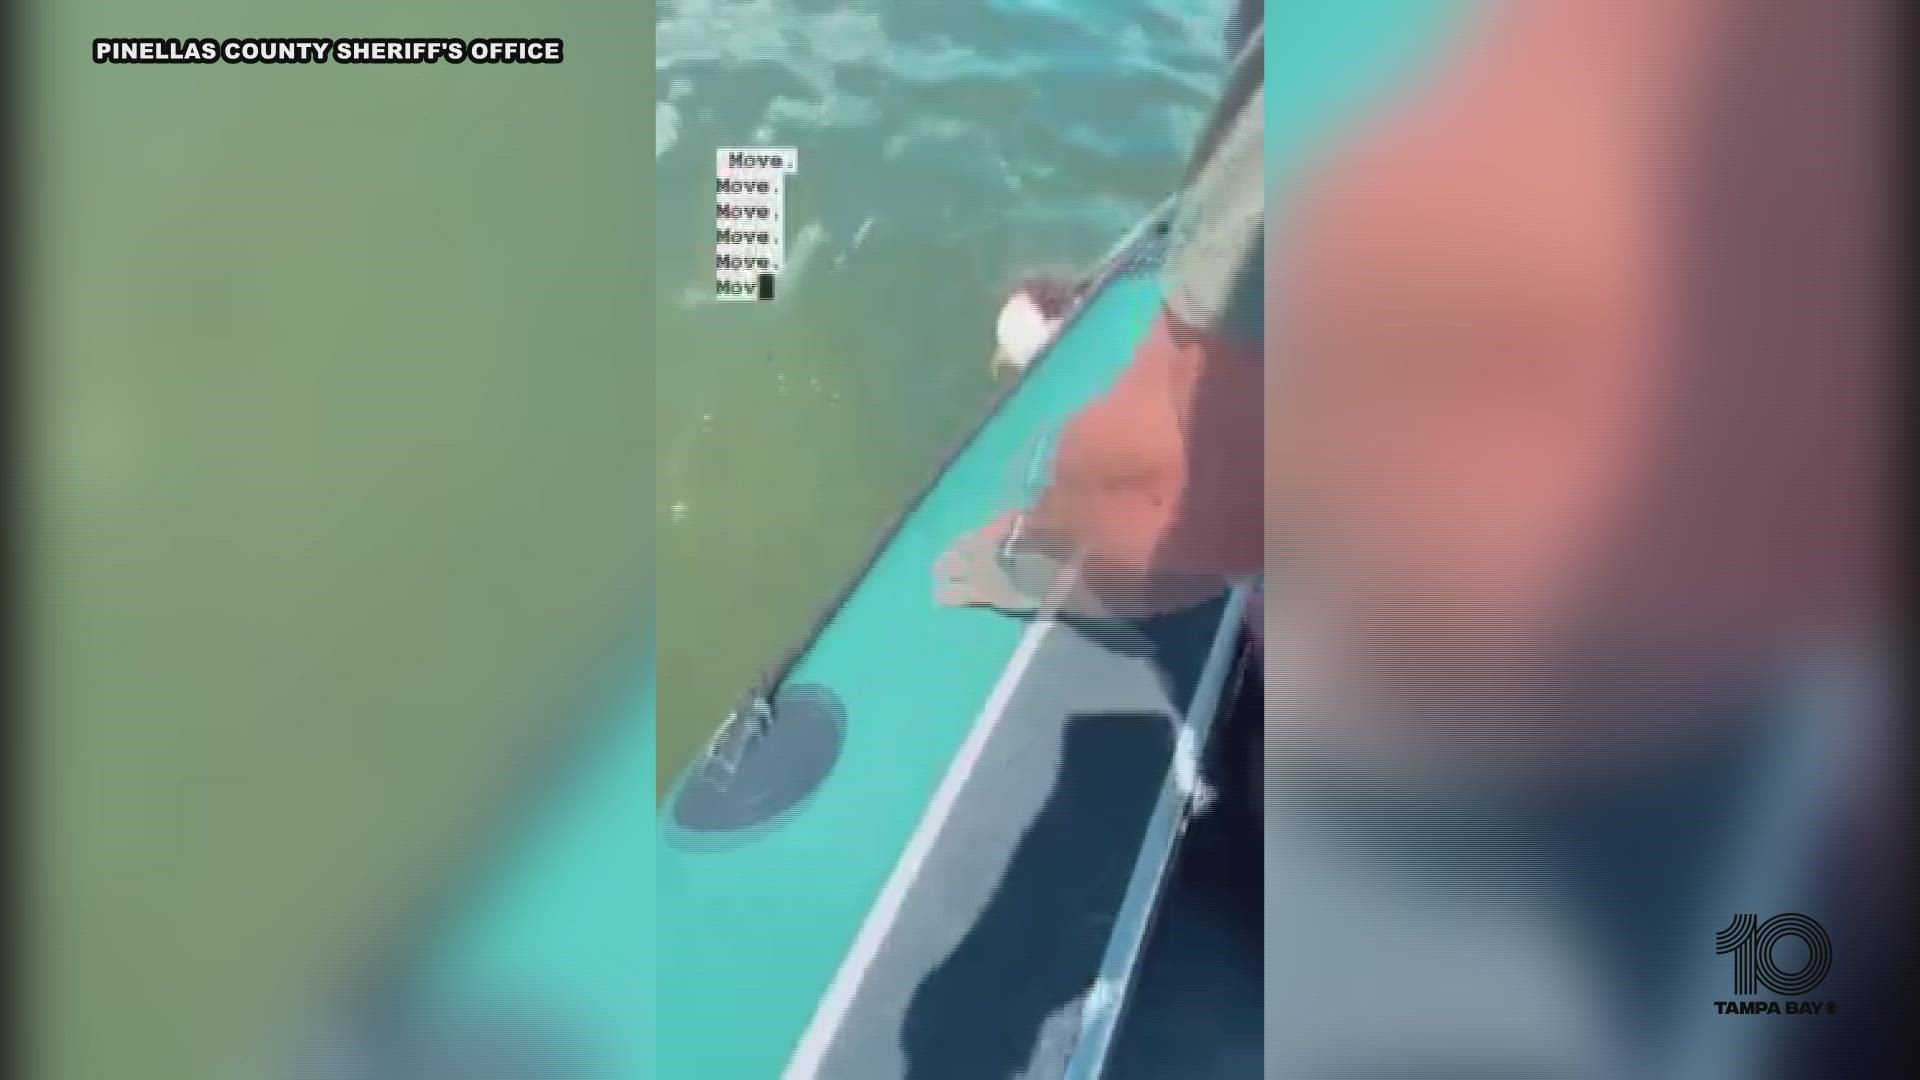 Earlier this week, a lucky shark was set free by Pinellas County deputies after getting caught in a crab trap.